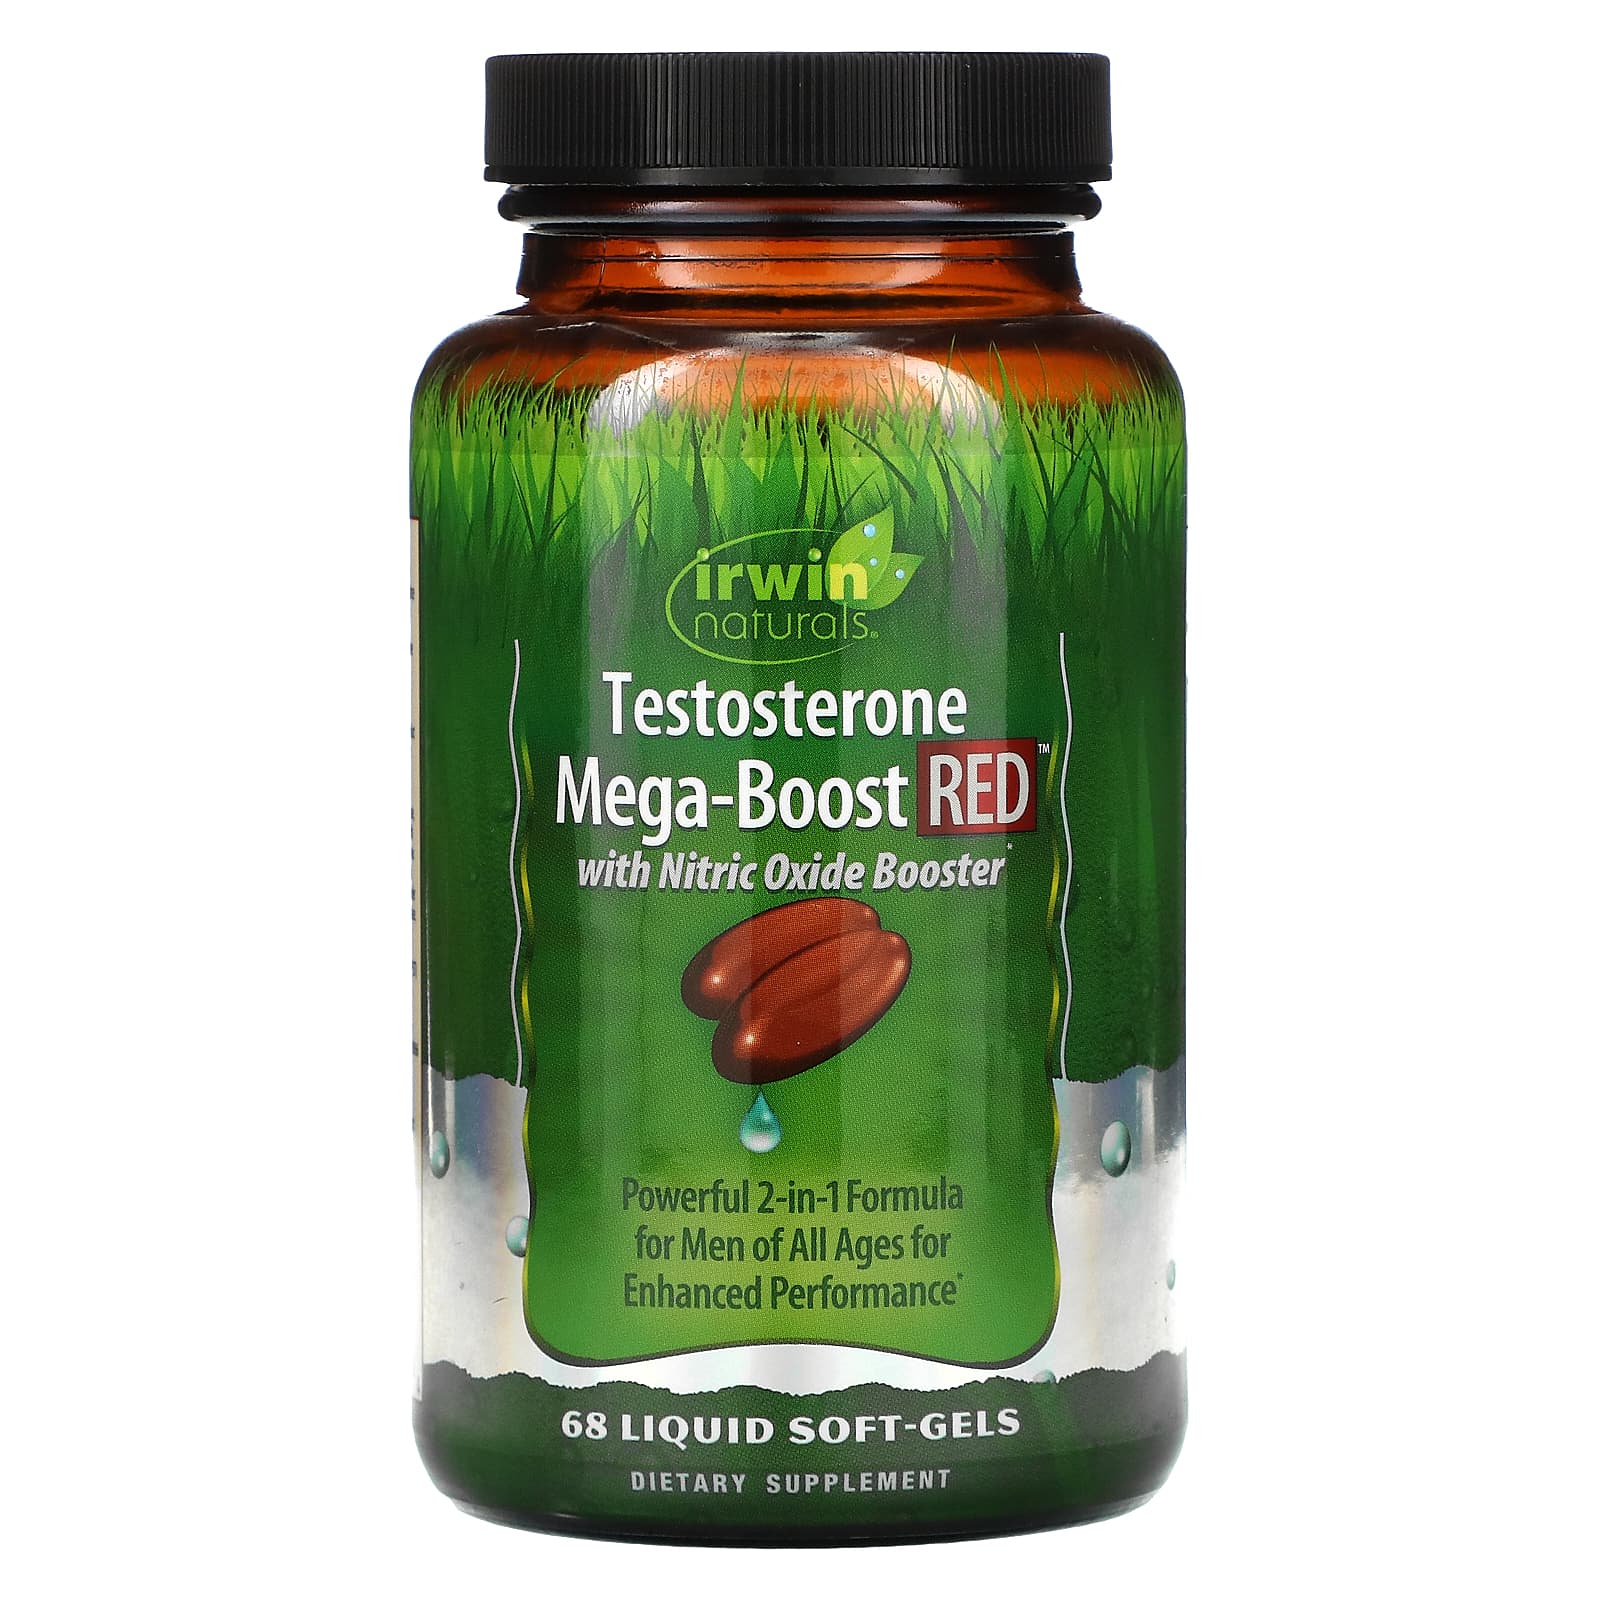 Irwin Naturals Testosterone Mega Boost Red Reviews